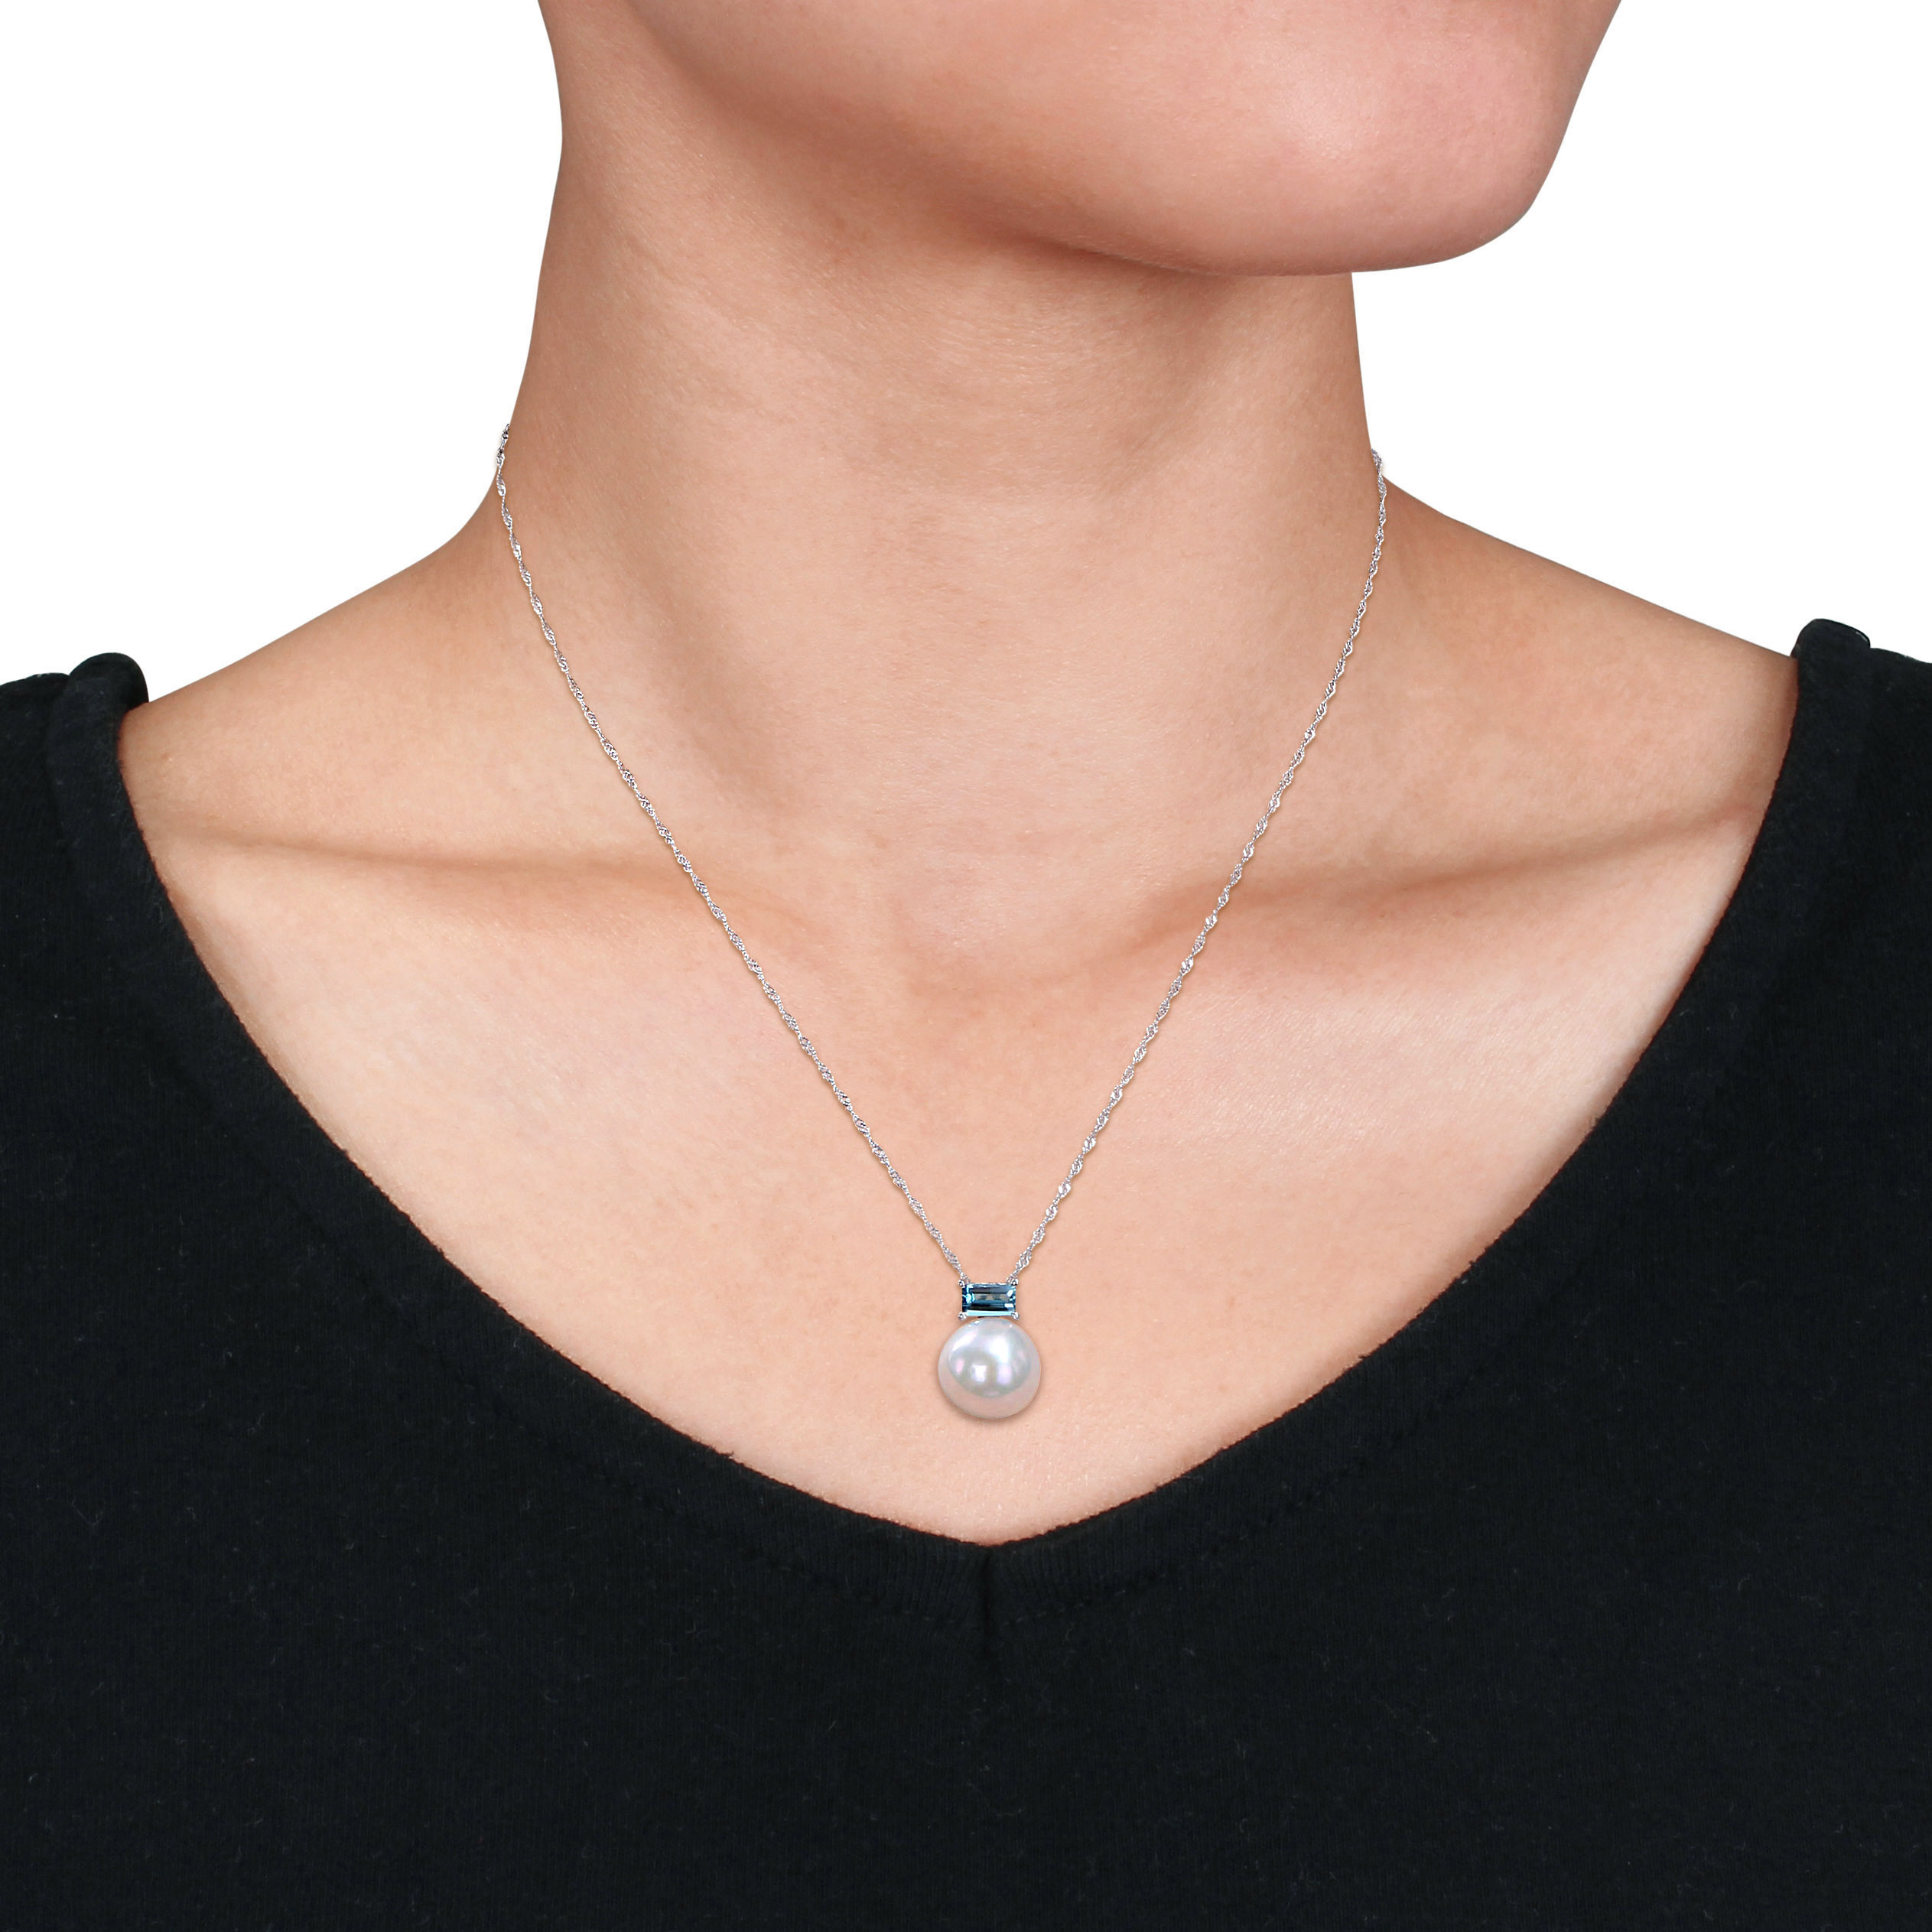 11-12 MM Cultured Freshwater Pearl and 3/4 CT TGW Baguette London Blue Topaz Stud Pendant with Chain in 10k White Gold